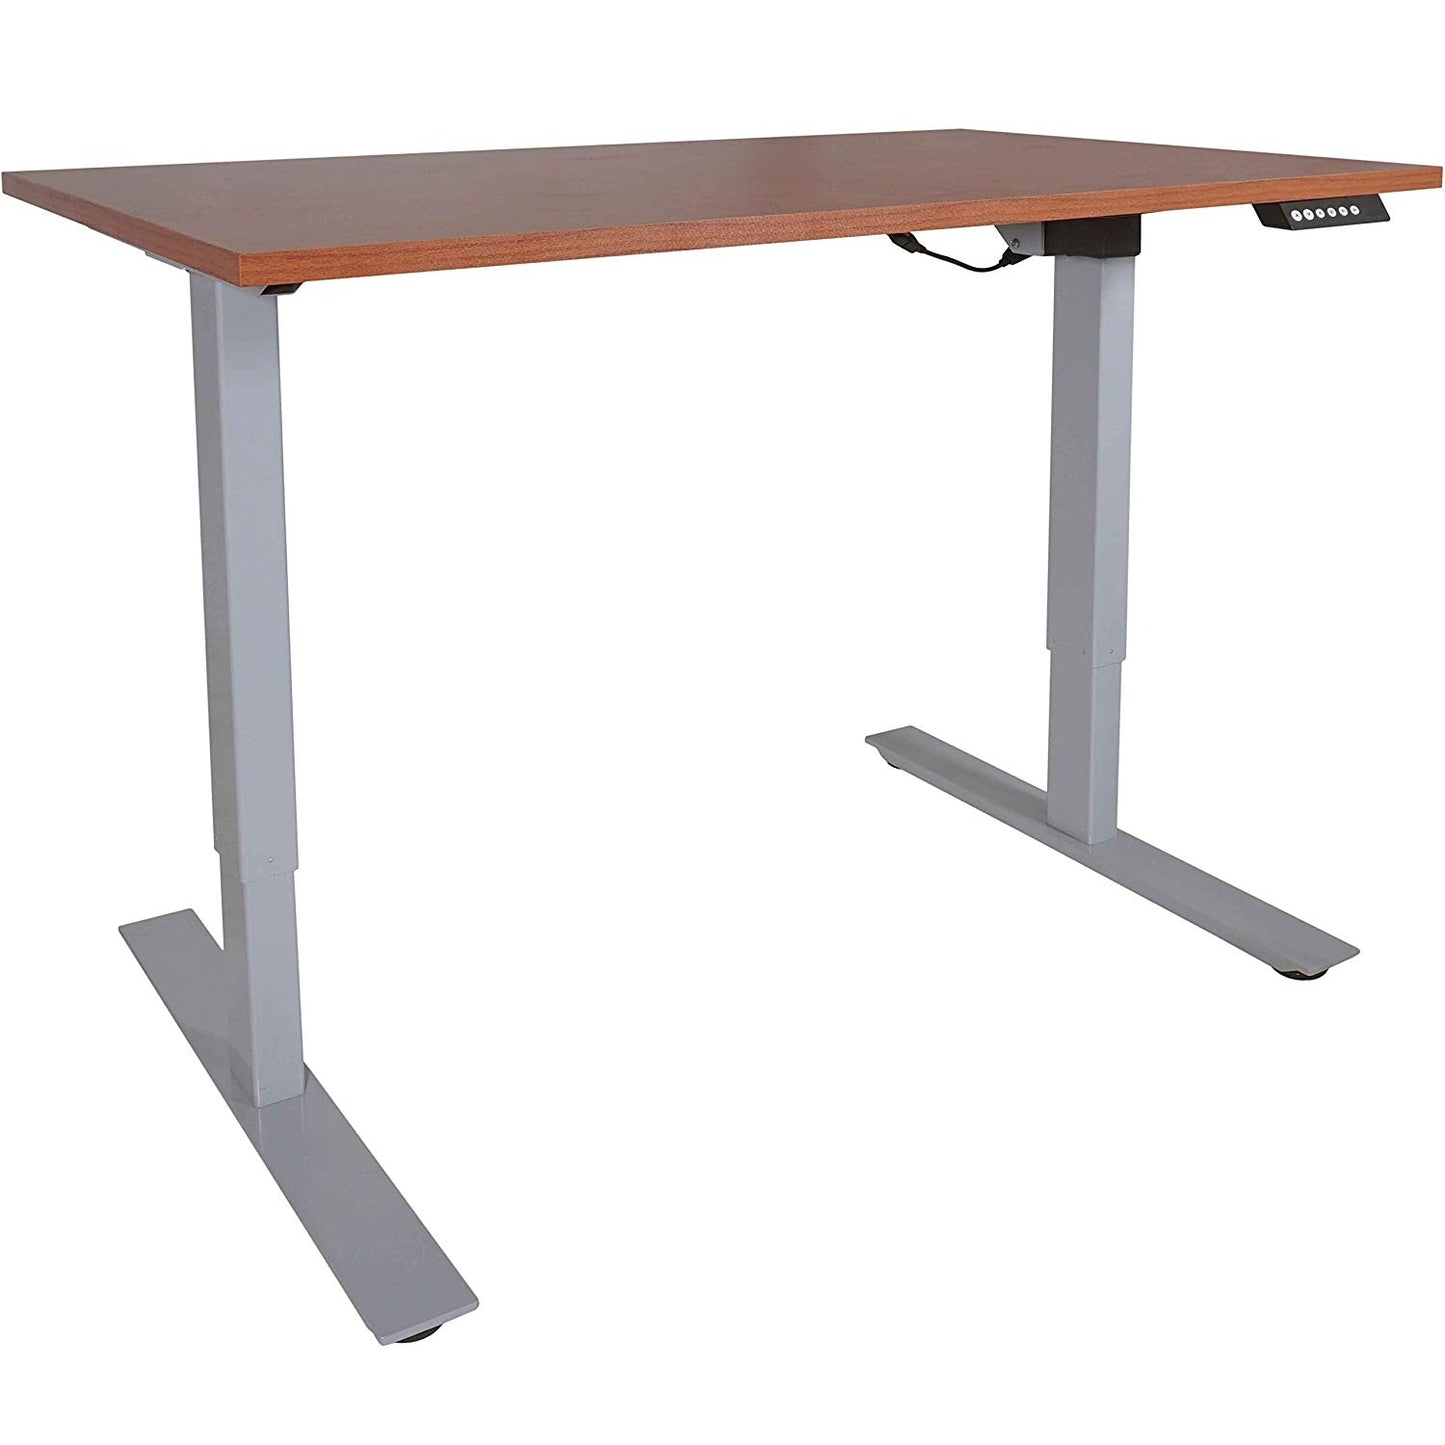 A2 Single Motor Sit To Stand Desk - 30x48 Cherry Wood Desktop - Silver Frame - view 1